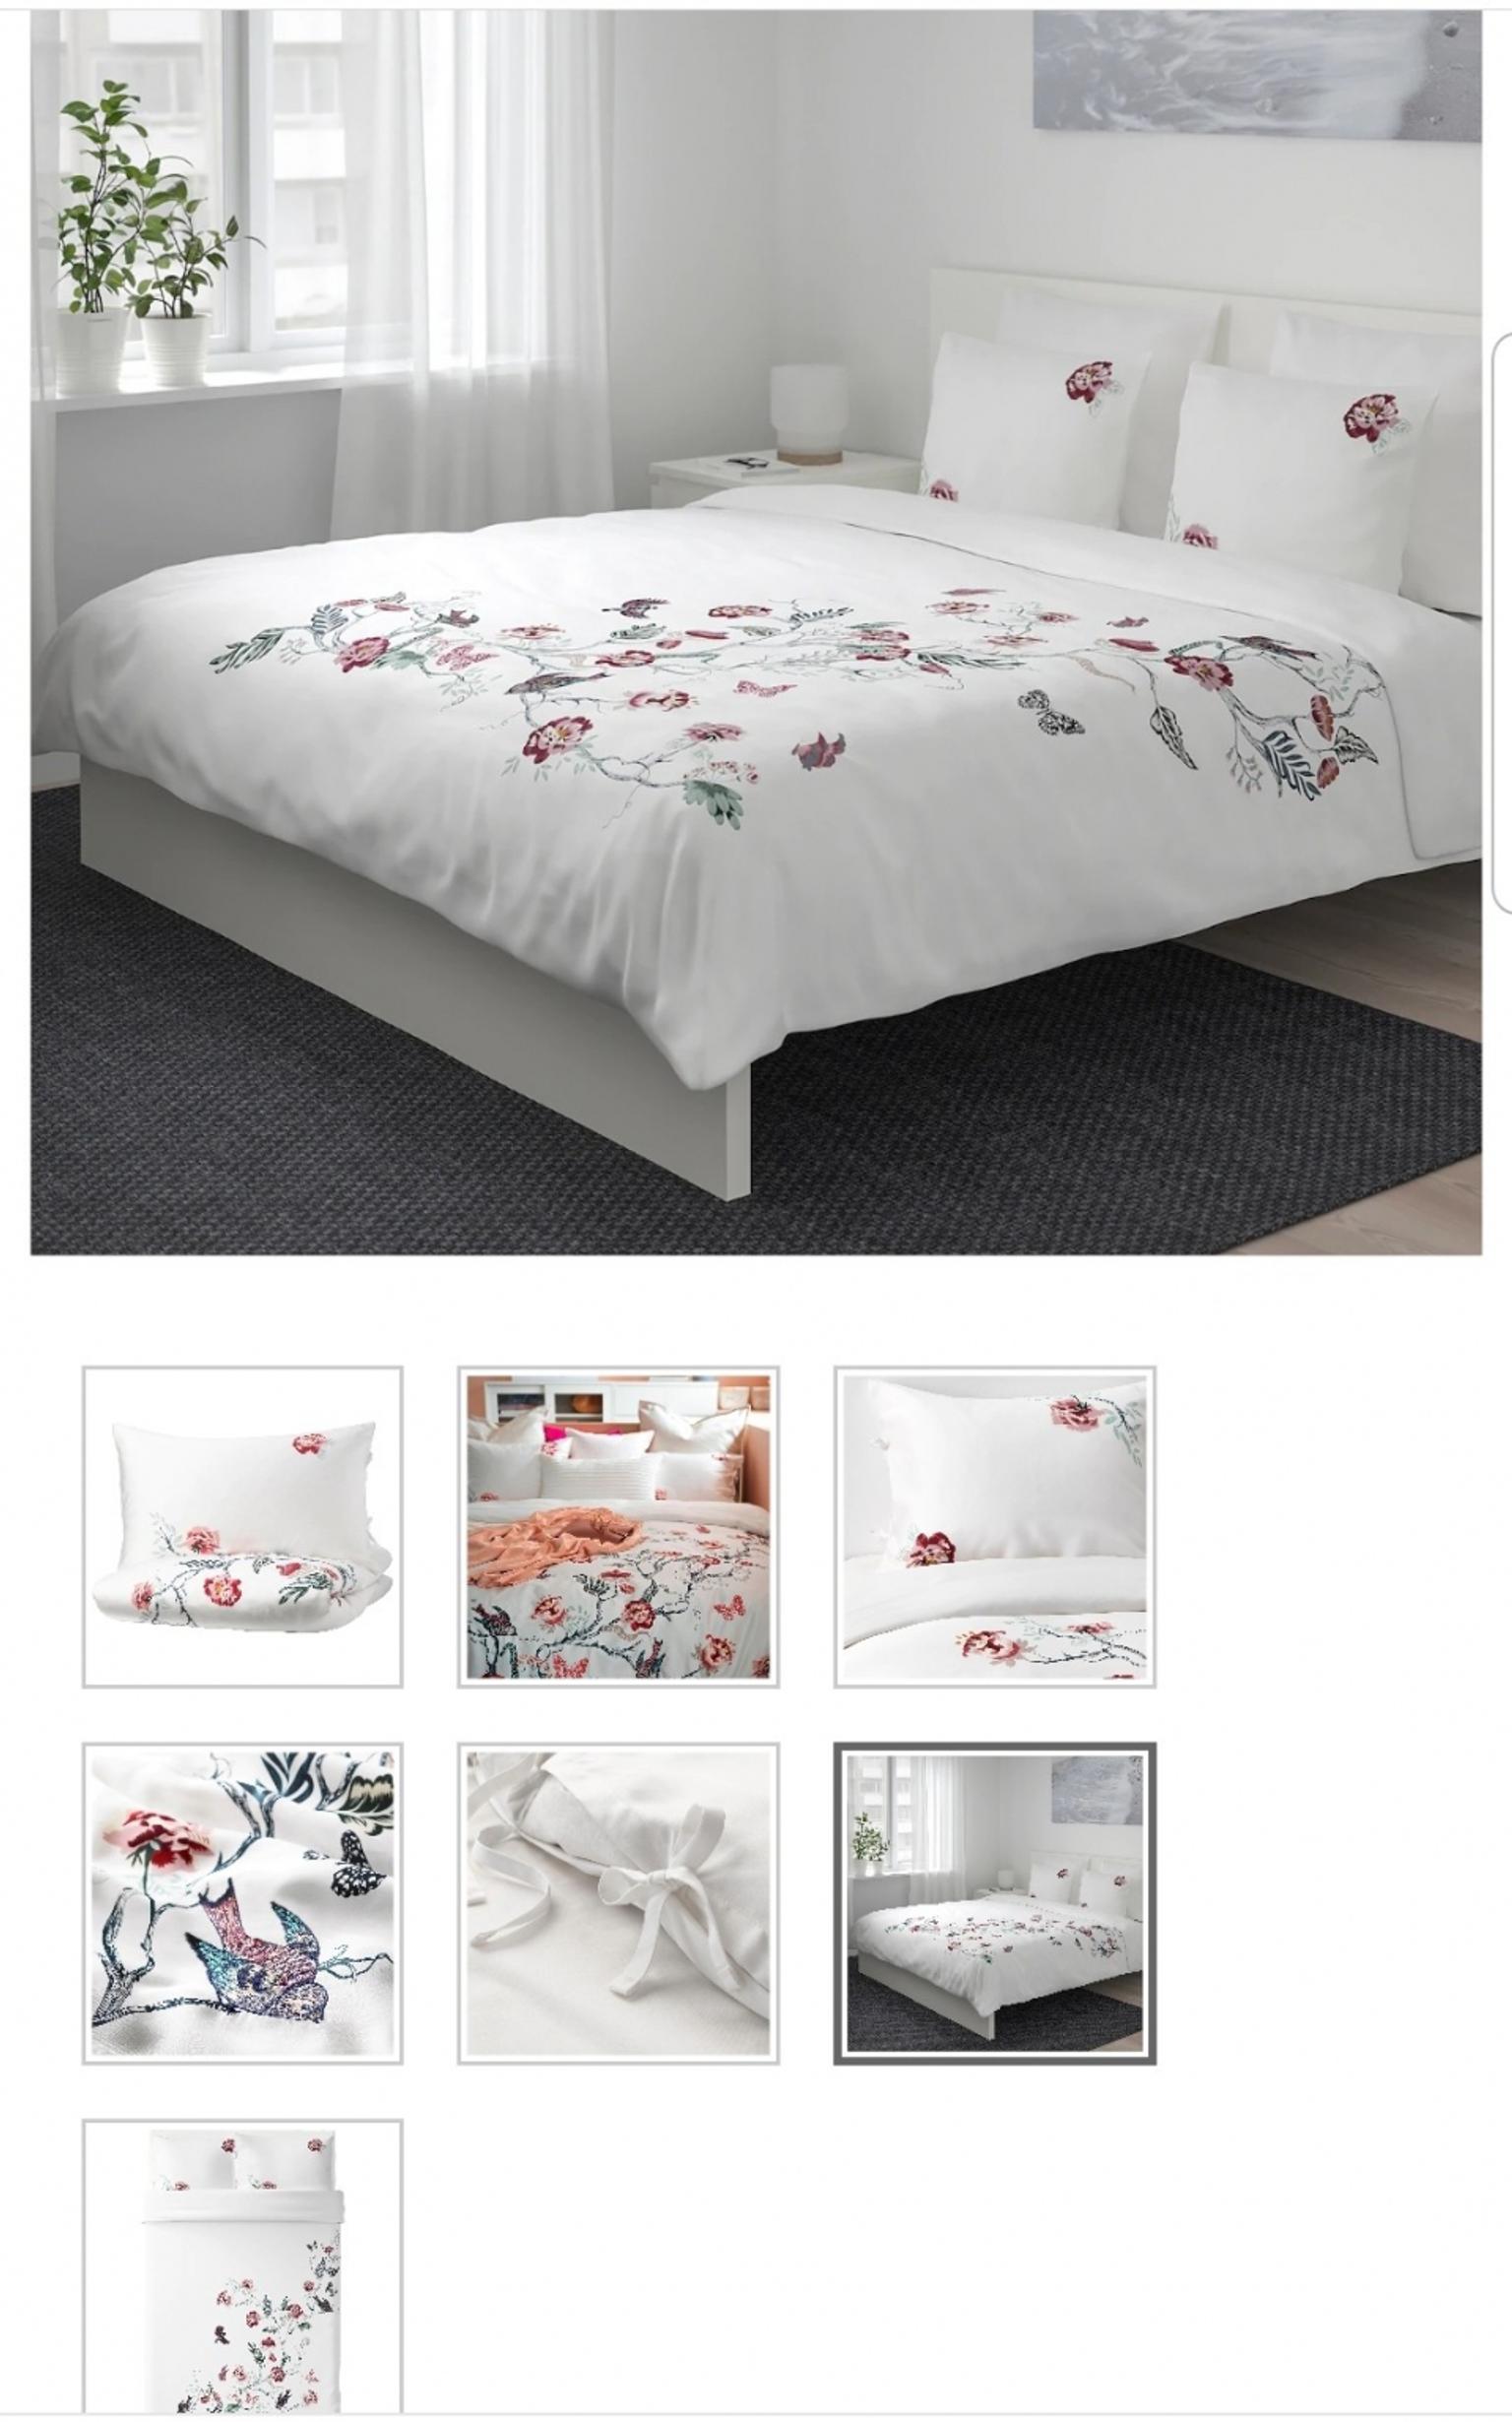 Ikea Double Duvet Cover Set In E5 London For 20 00 For Sale Shpock